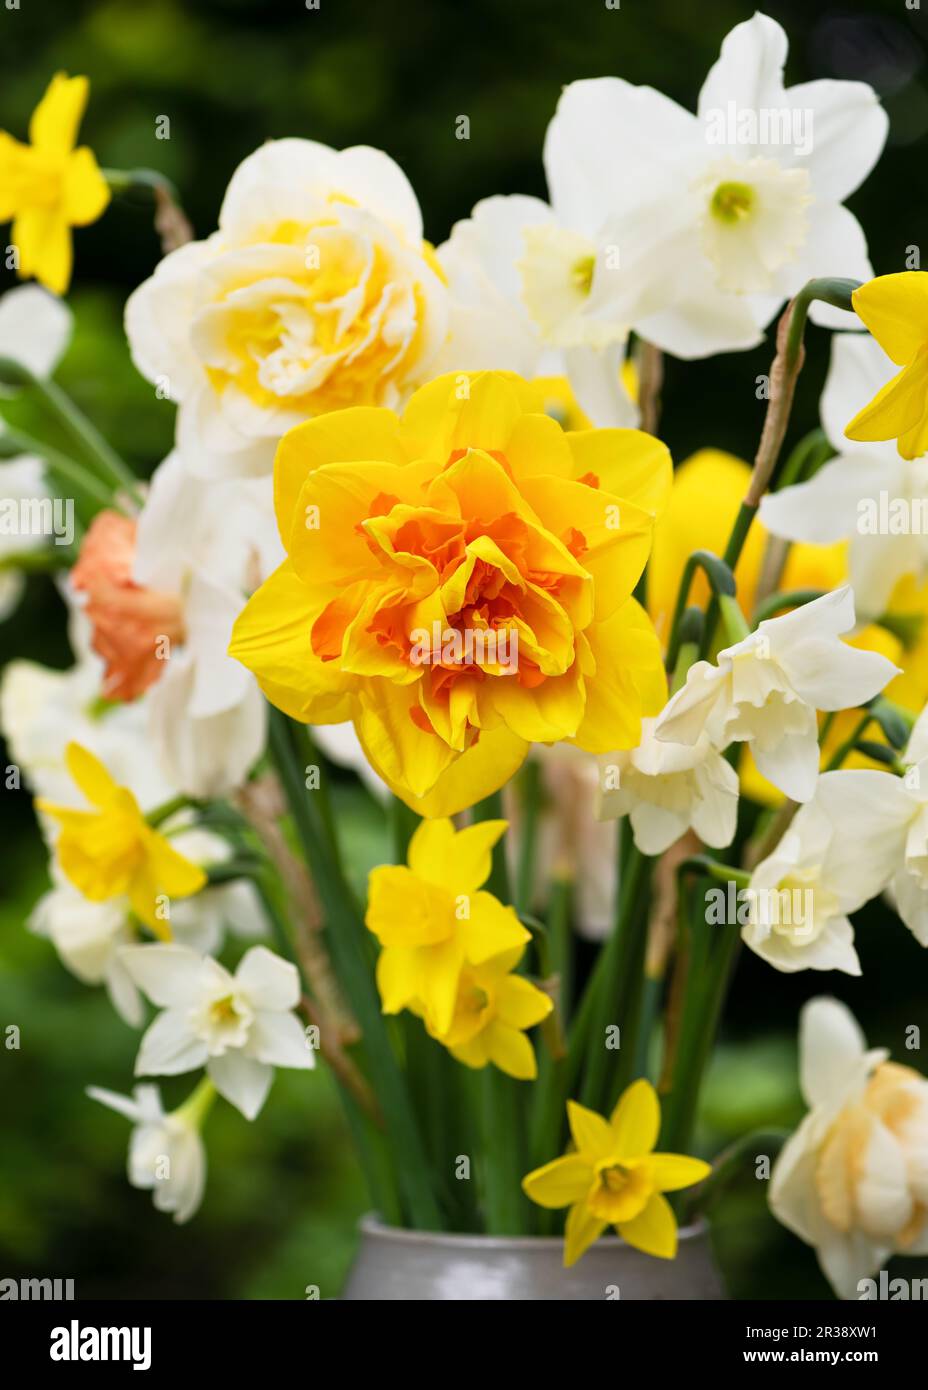 Beautiful different sorts of daffodils white, yellow, double flowers  in stone mug in the garden. Yellow, orange filled Narzissen. Selective focus. Stock Photo